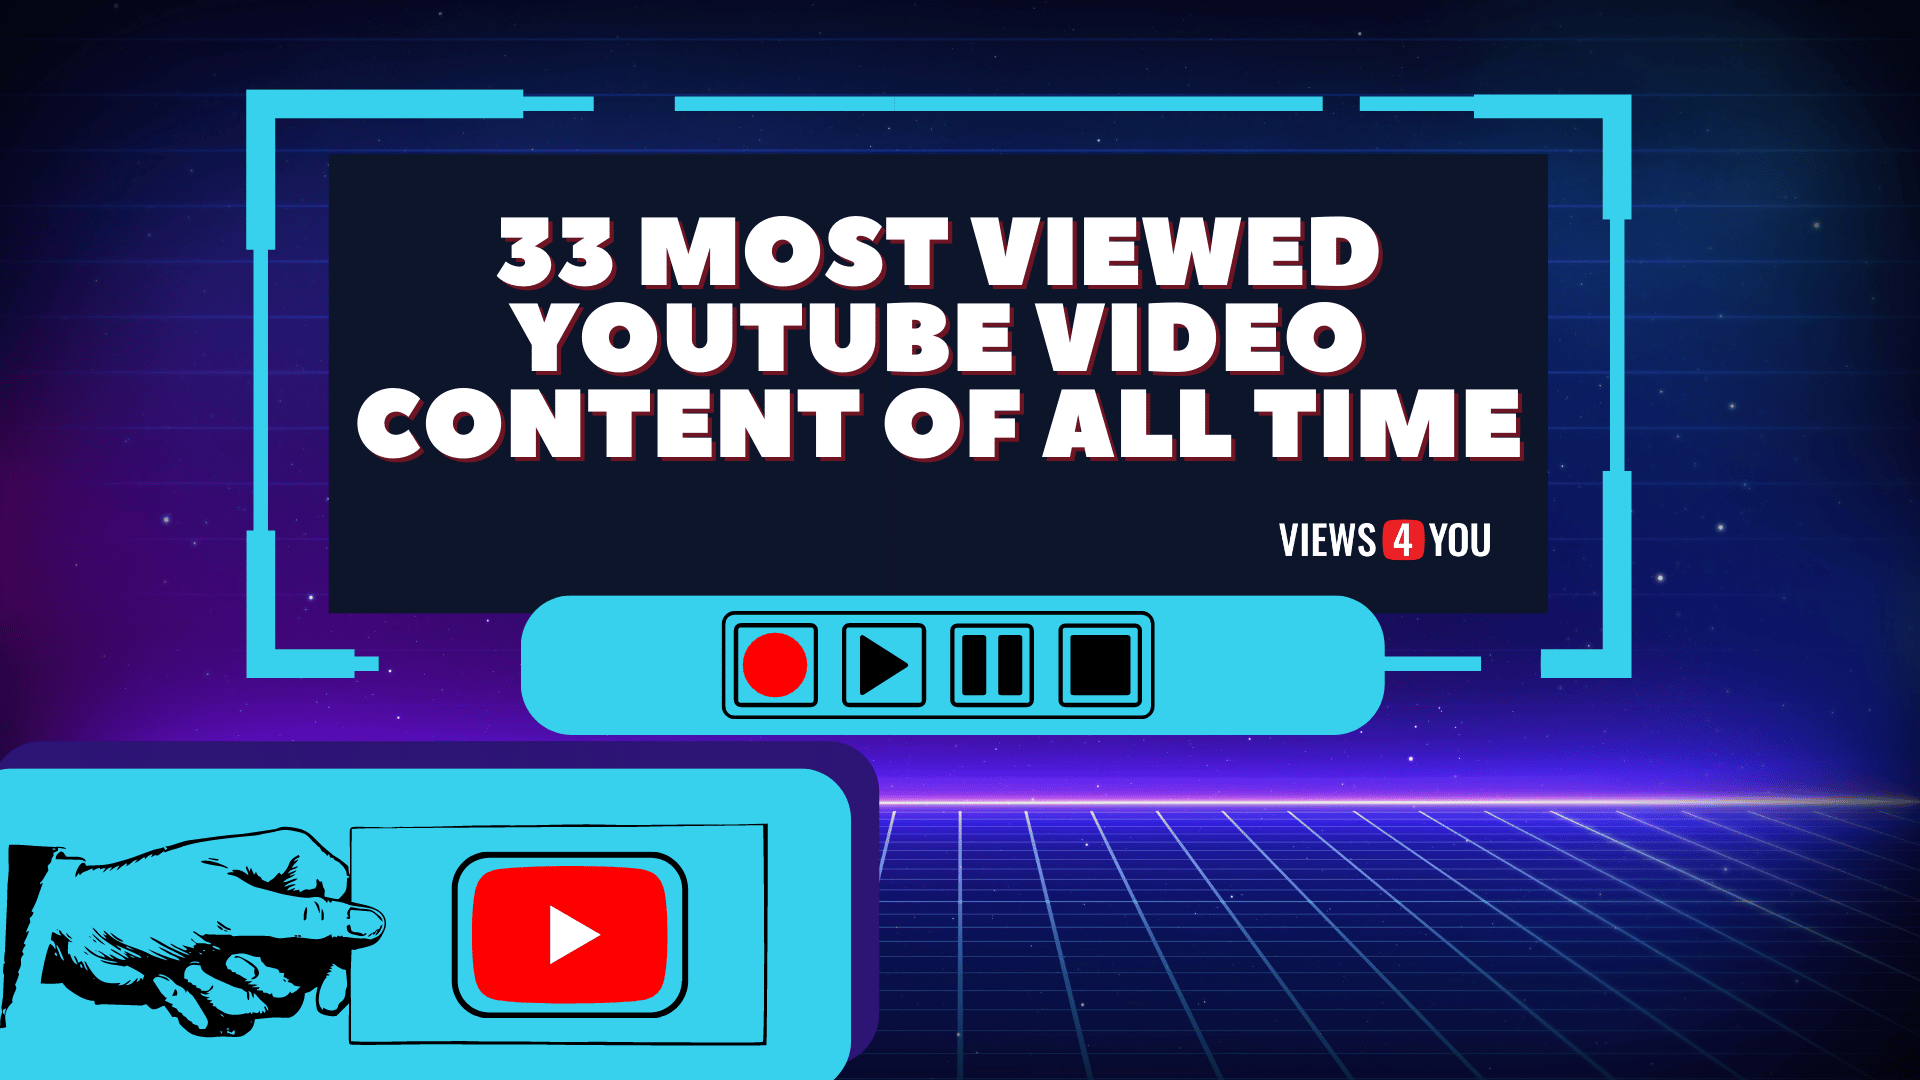 33 Most Viewed YouTube Video Content Of All Time